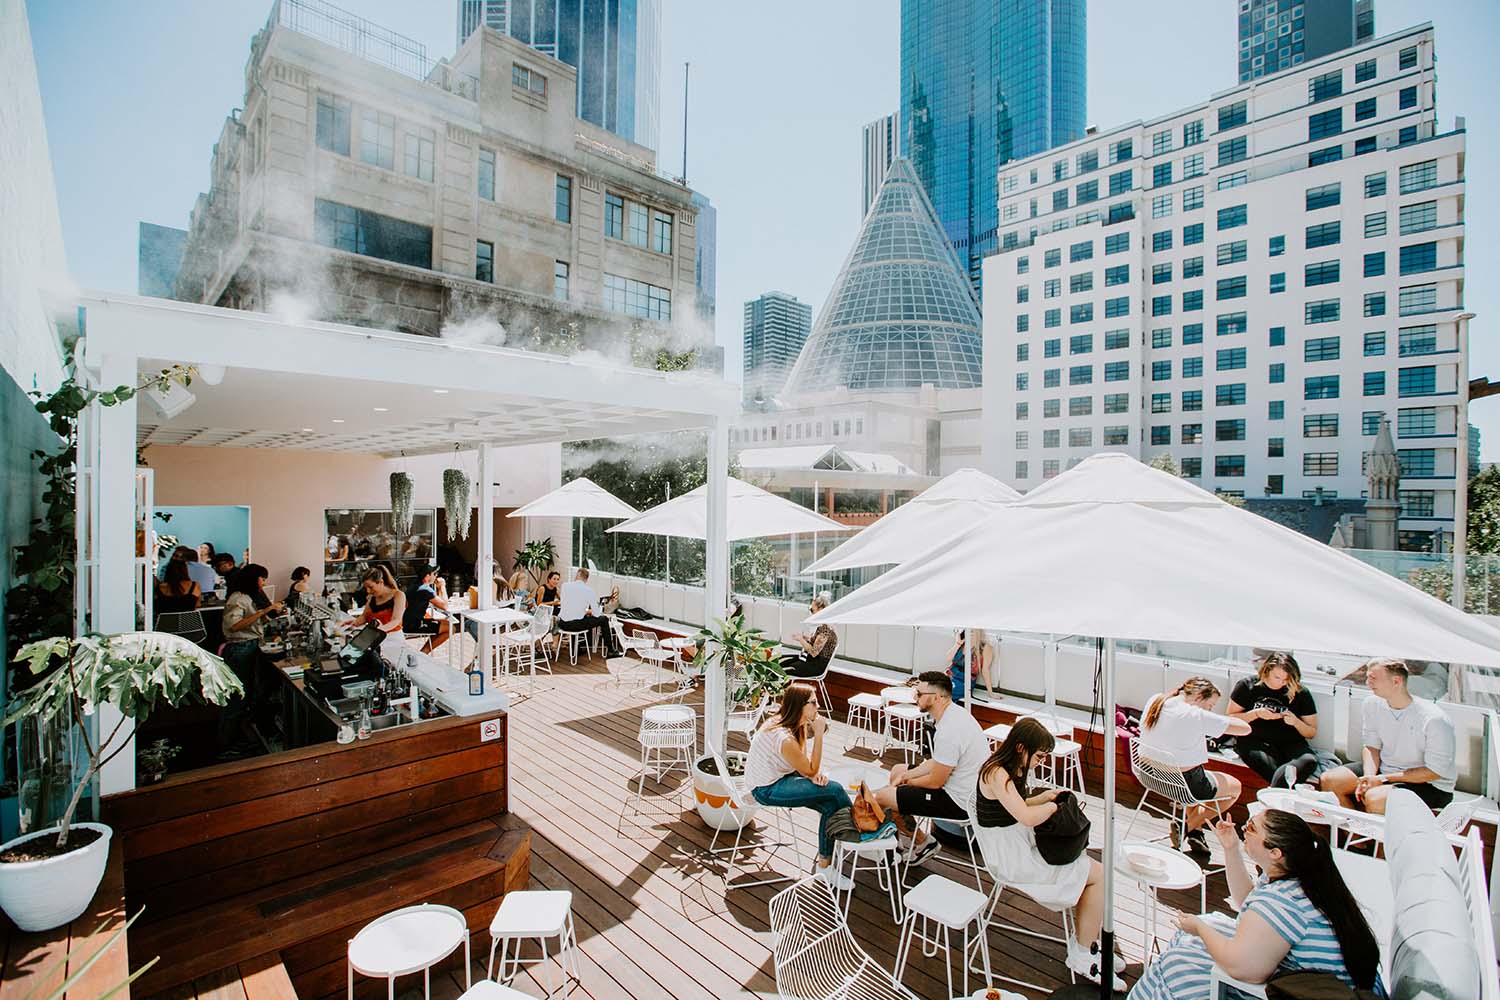 Peaches Melbourne Is A Bar And Rooftop With Pastel Hued Flair